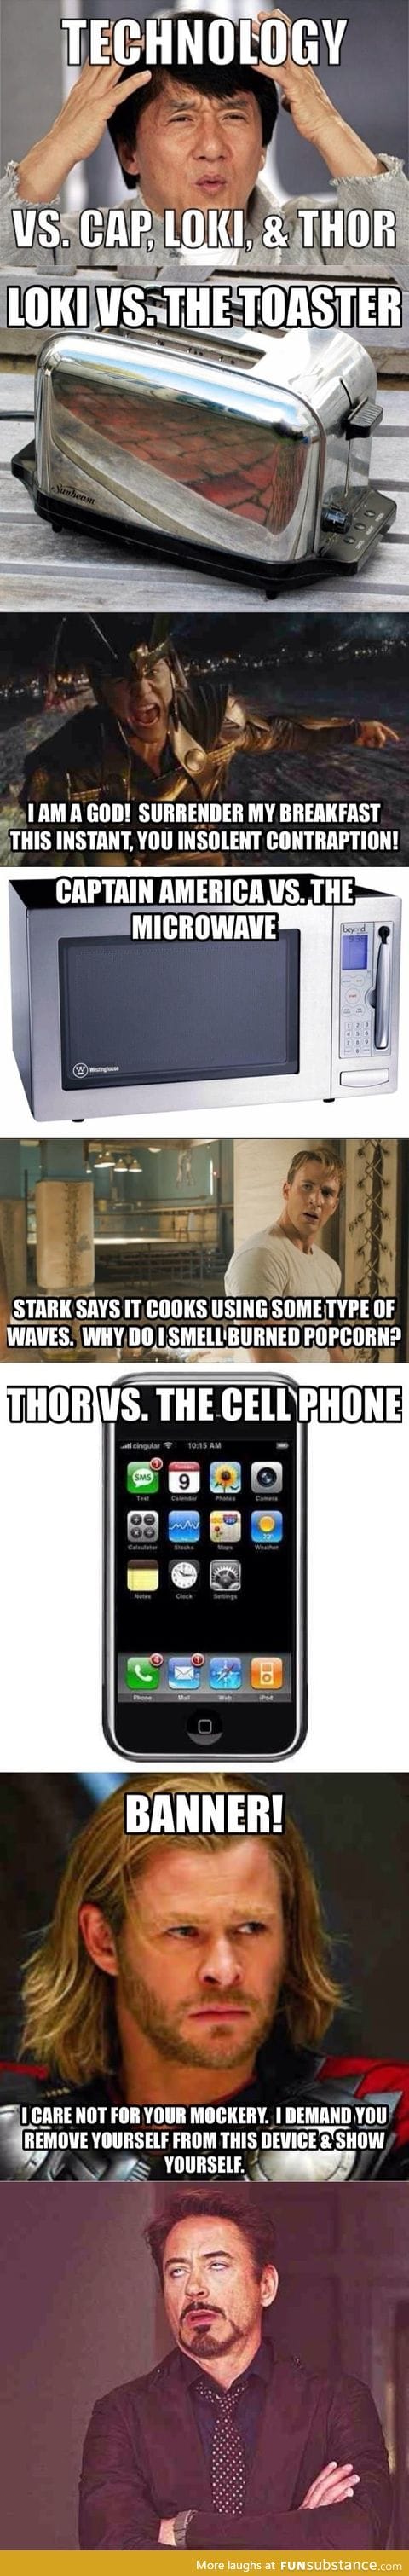 "The slightly technologically impaired Asgardians & Captain America."